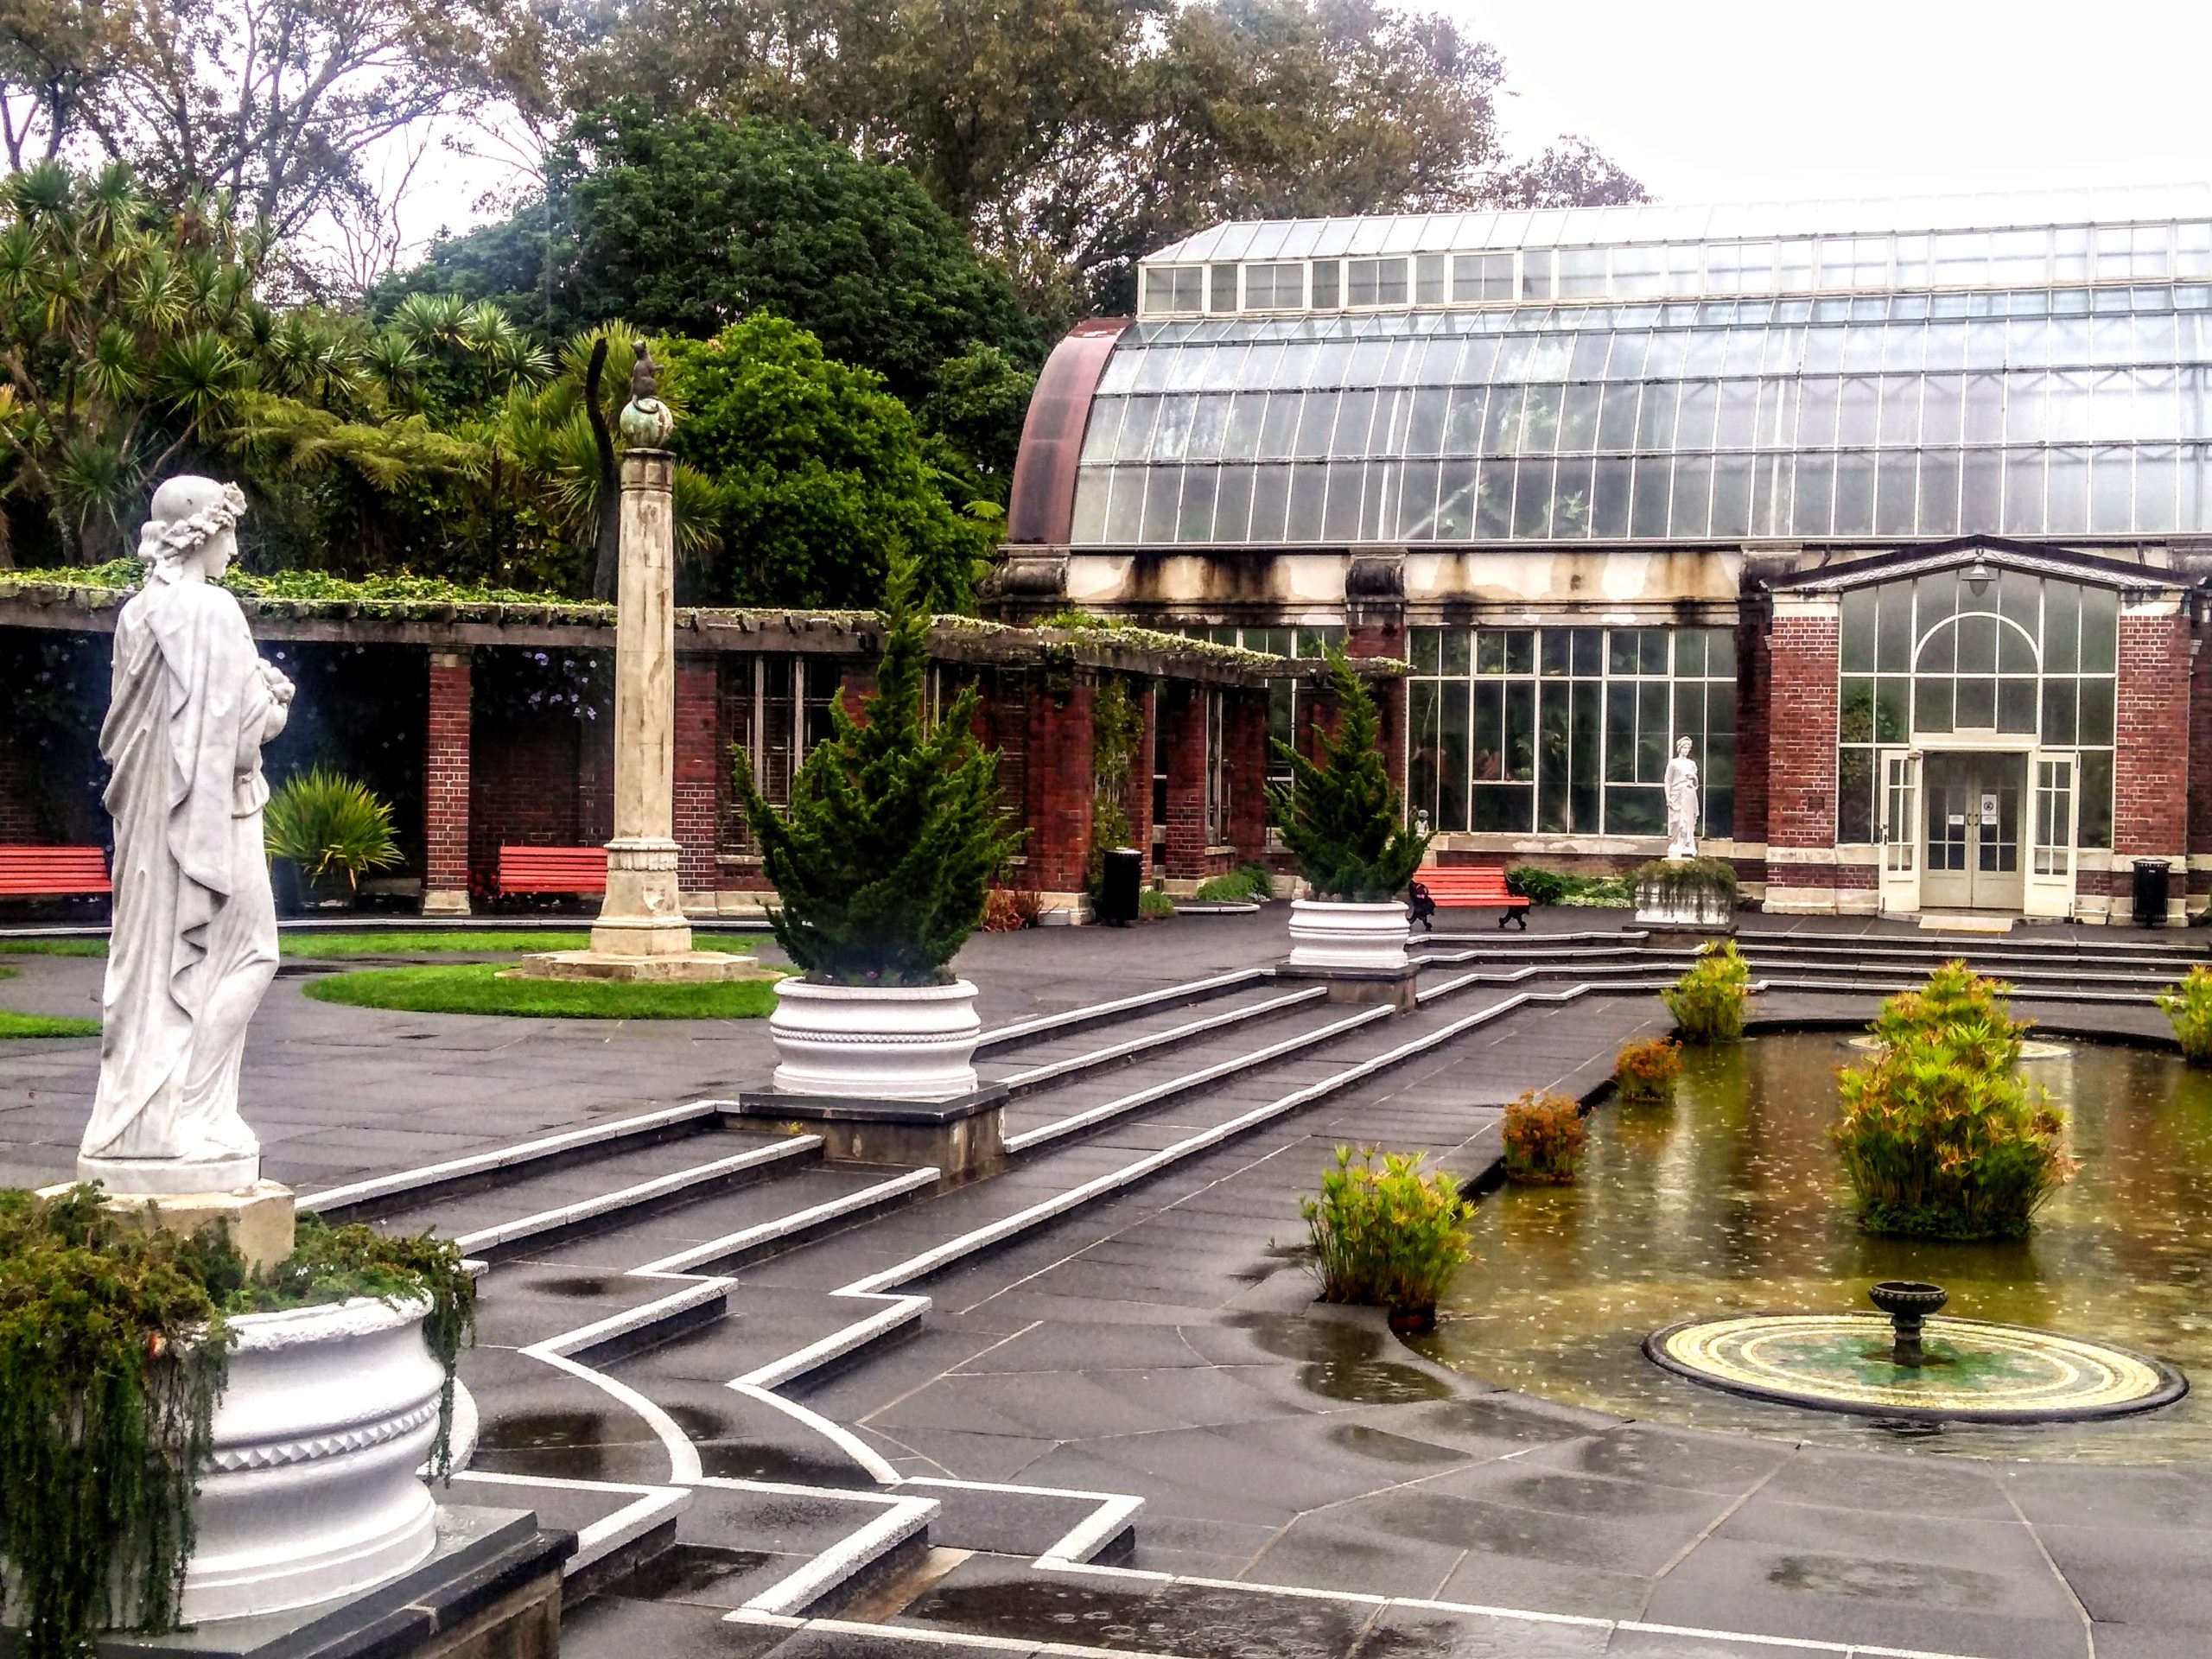 Photo from outside entrance to Auckland New Zealand Wintergardens